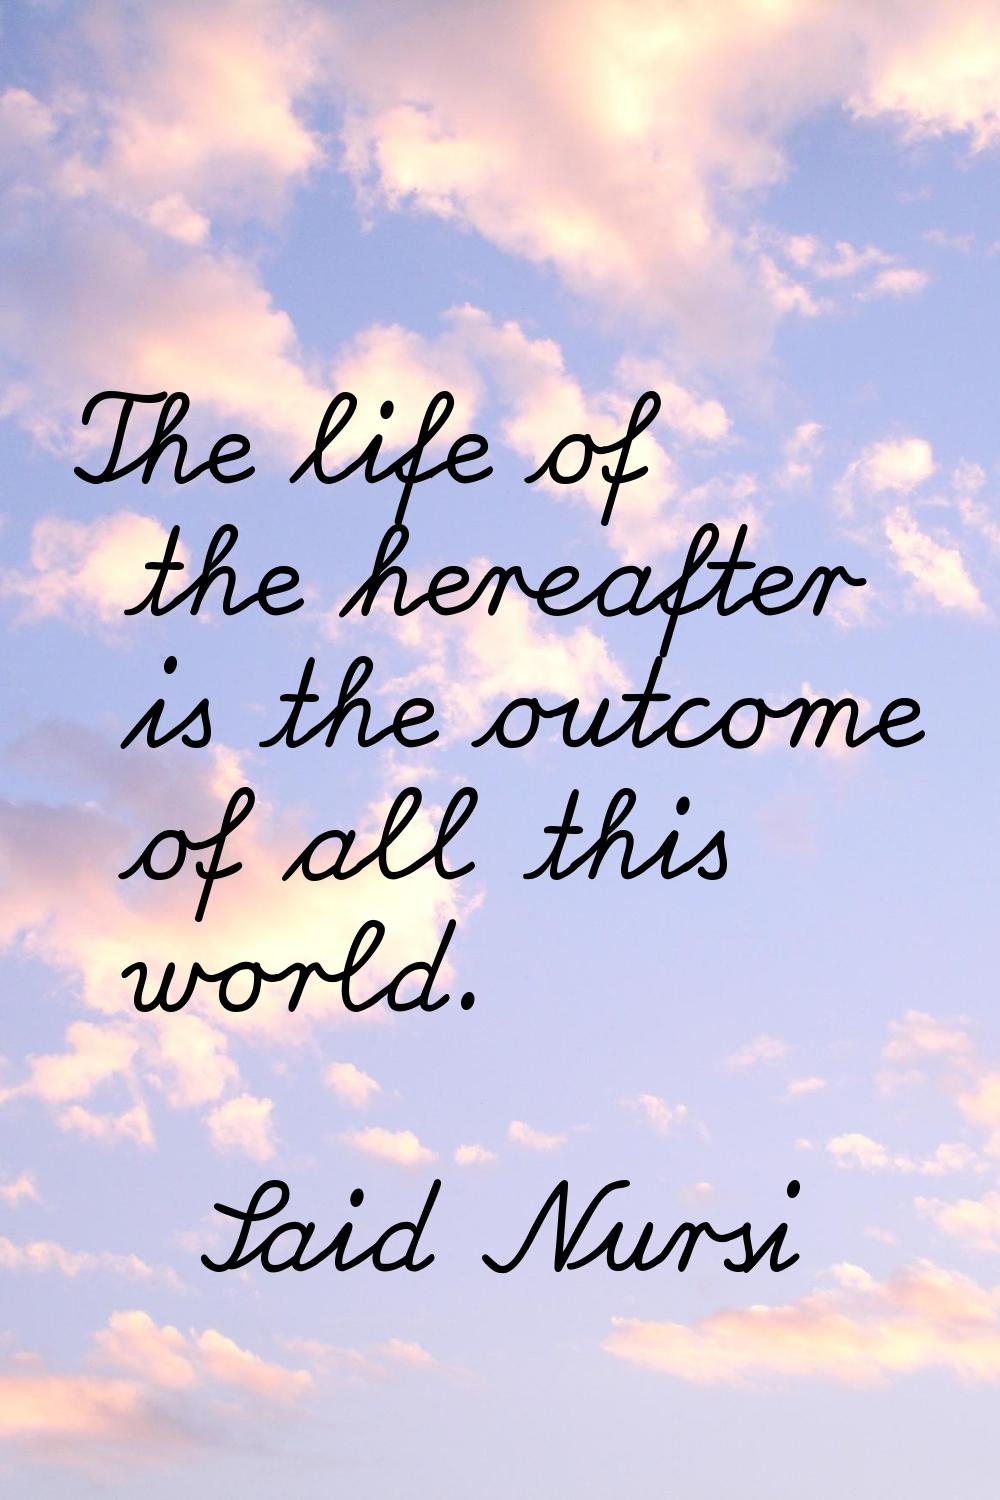 The life of the hereafter is the outcome of all this world.